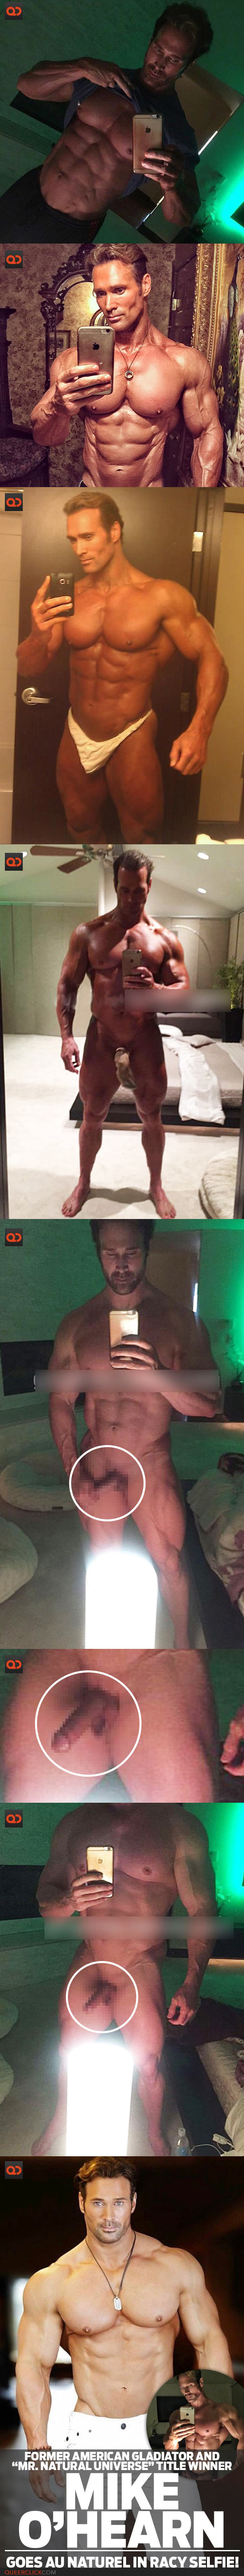 Mike O’Hearn, Former American Gladiator and “Mr. Natural Universe” Title Winner Goes Au Natural In Racy Selfie!